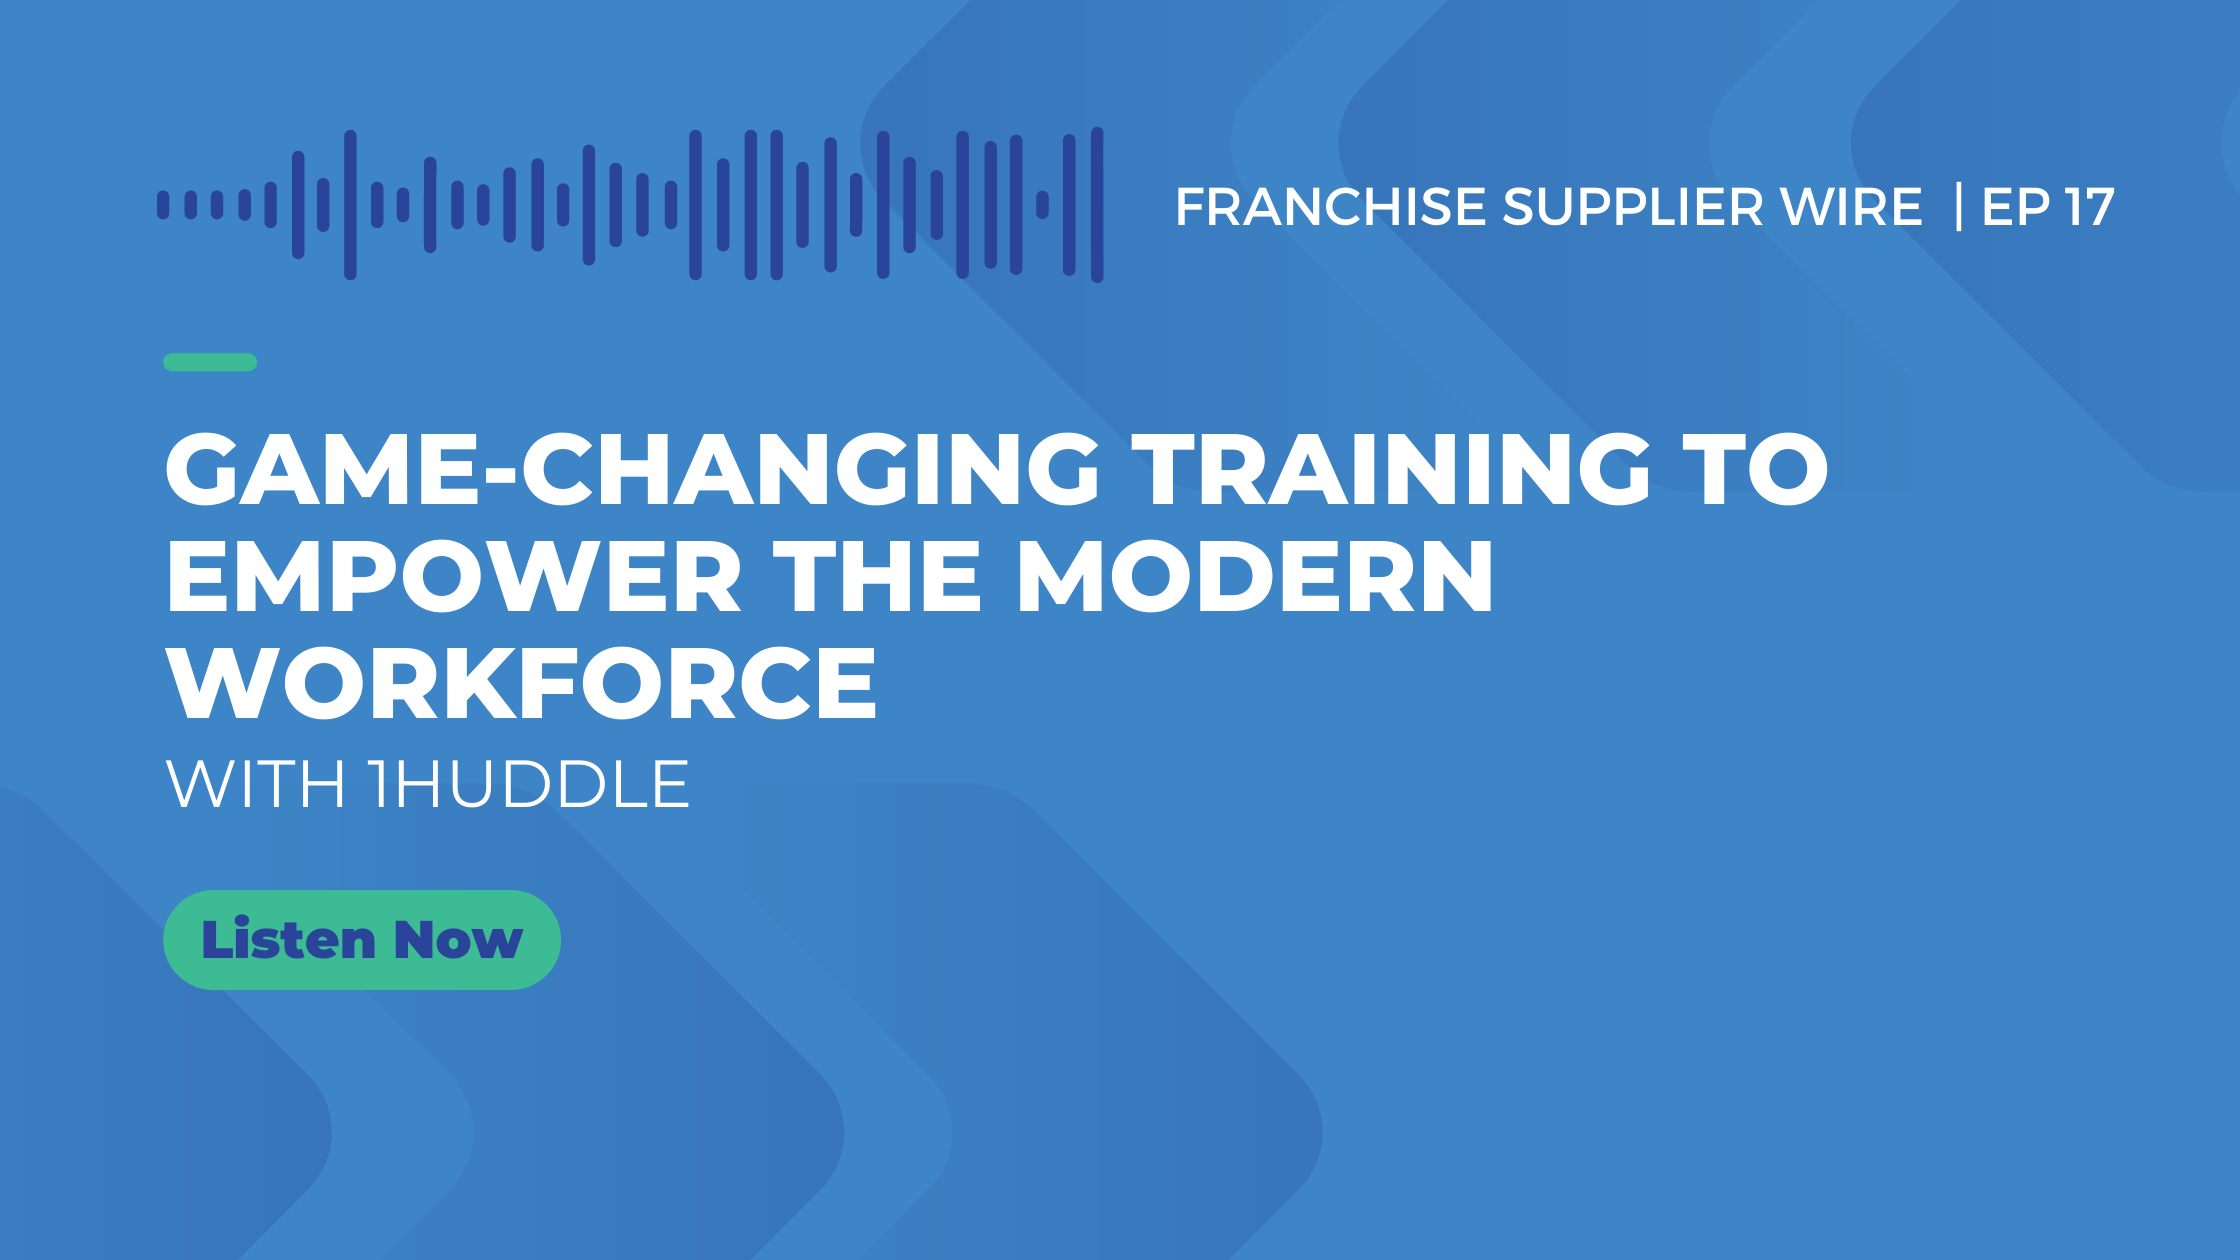 Game-Changing Training to Empower the Modern Workforce